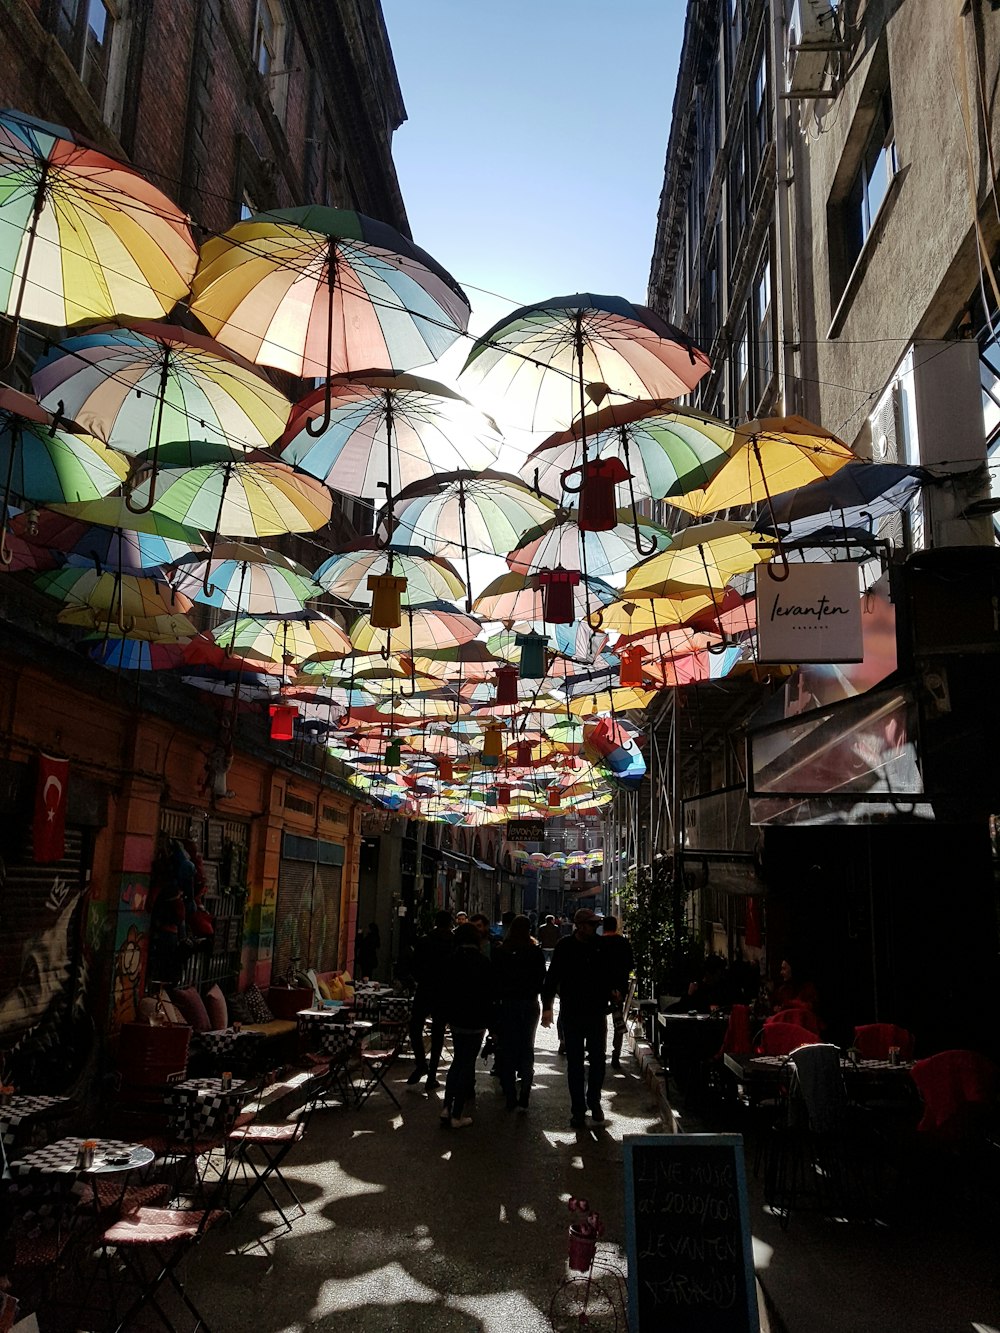 a group of people walking down a street under umbrellas